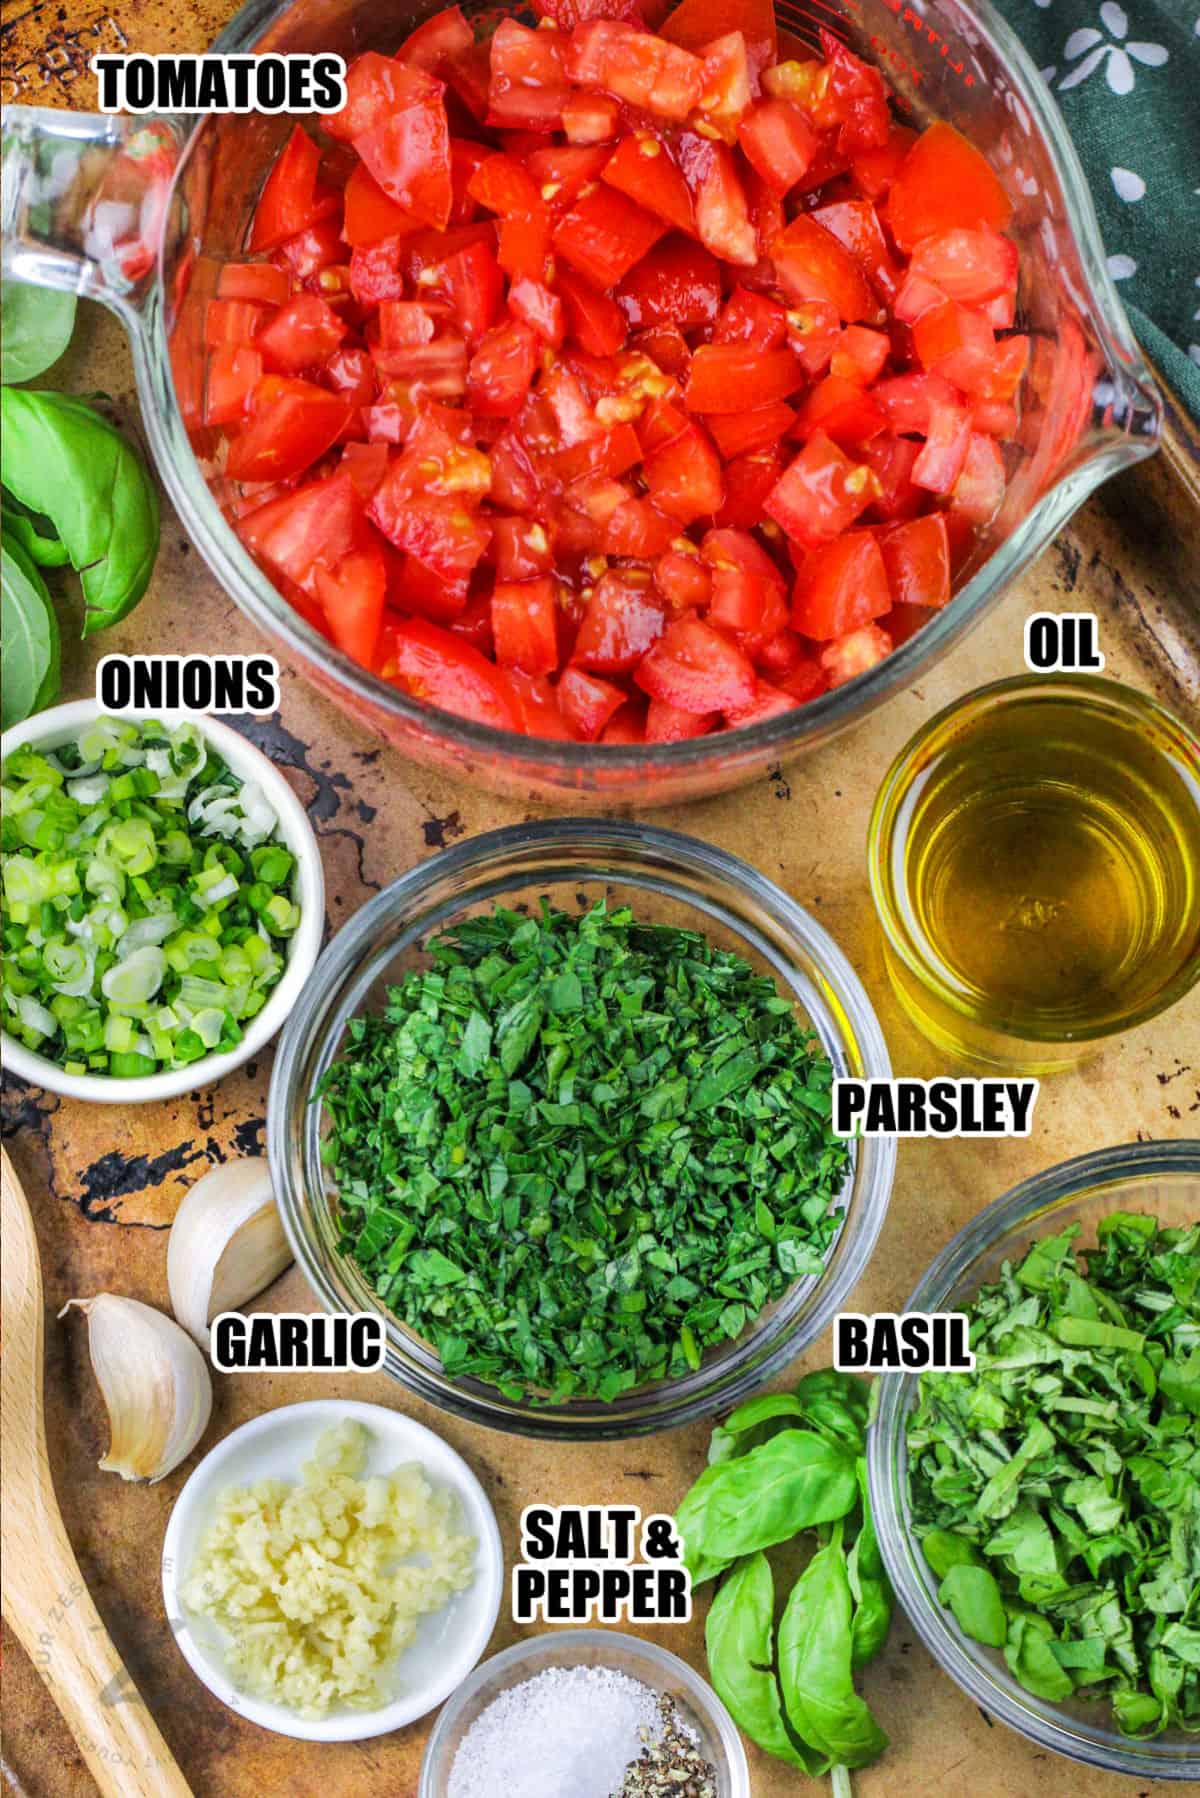 tomatoes, onions , oil , garlic , parsley , basil and salt and pepper to make Best Bruschetta Recipe with labels